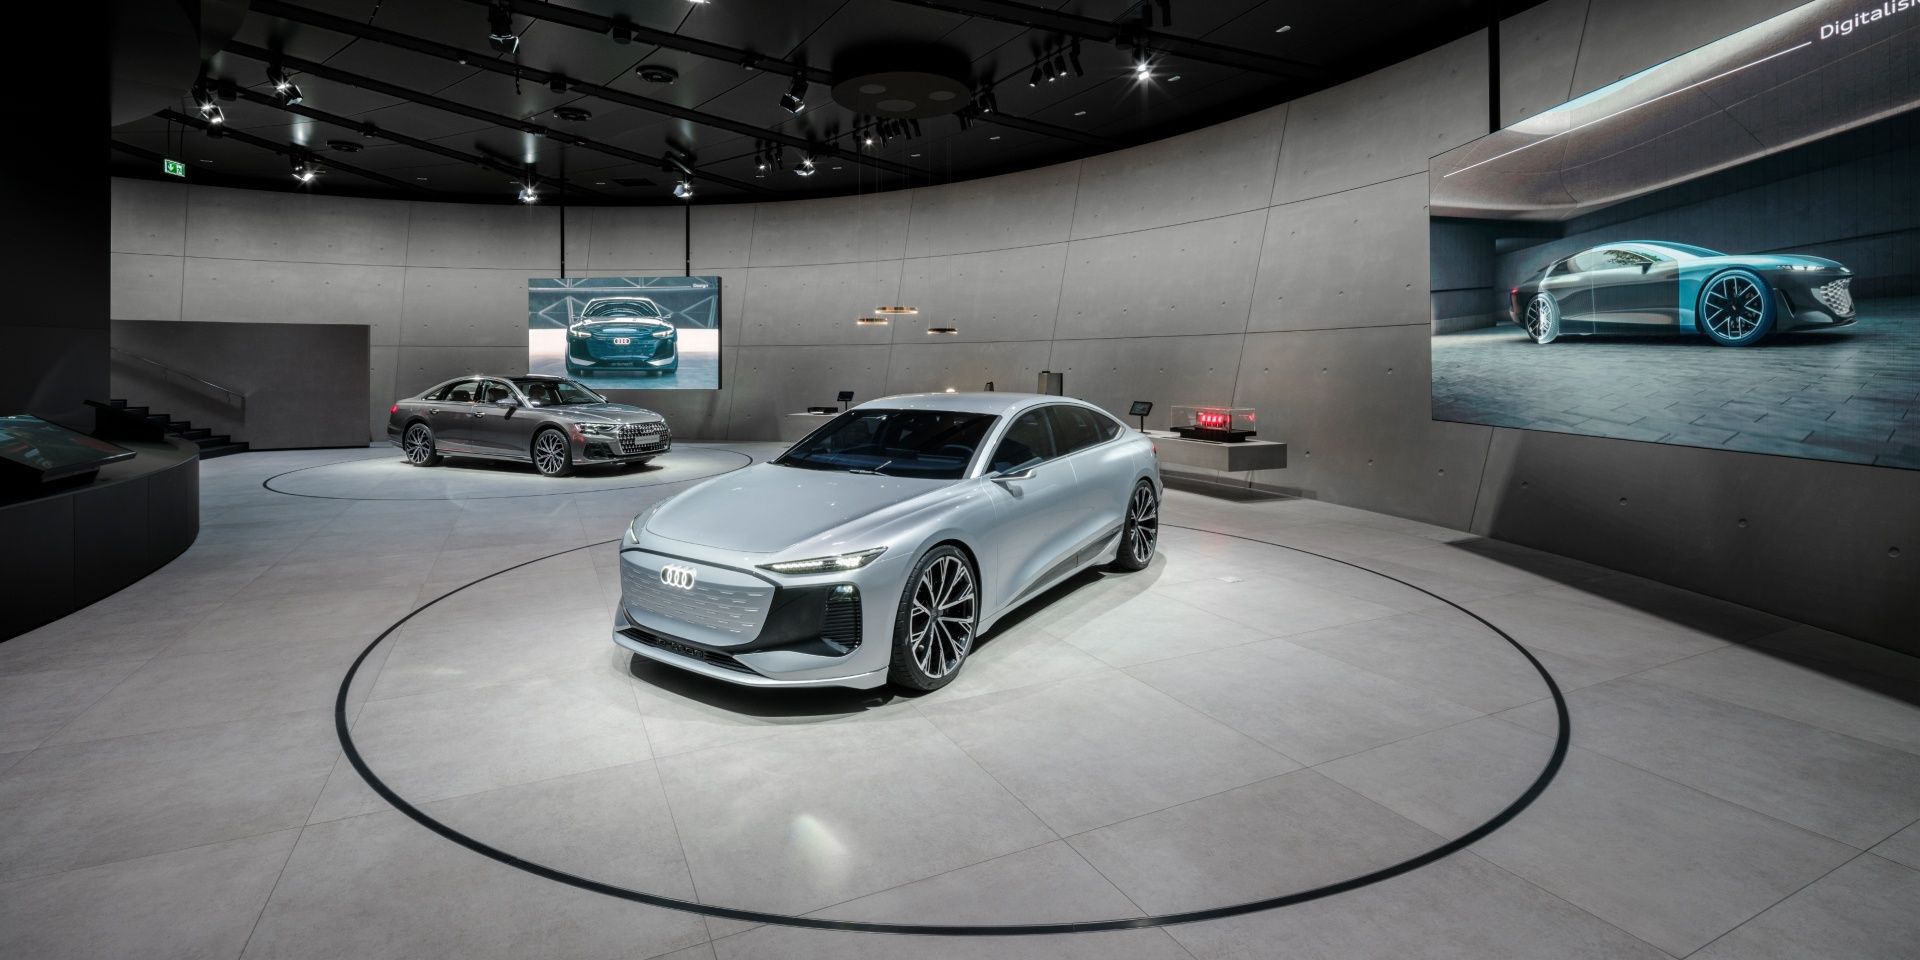 The exhibits Audi A8 60 TFSI, Audi A6 e-tron concept and digital OLED taillights.